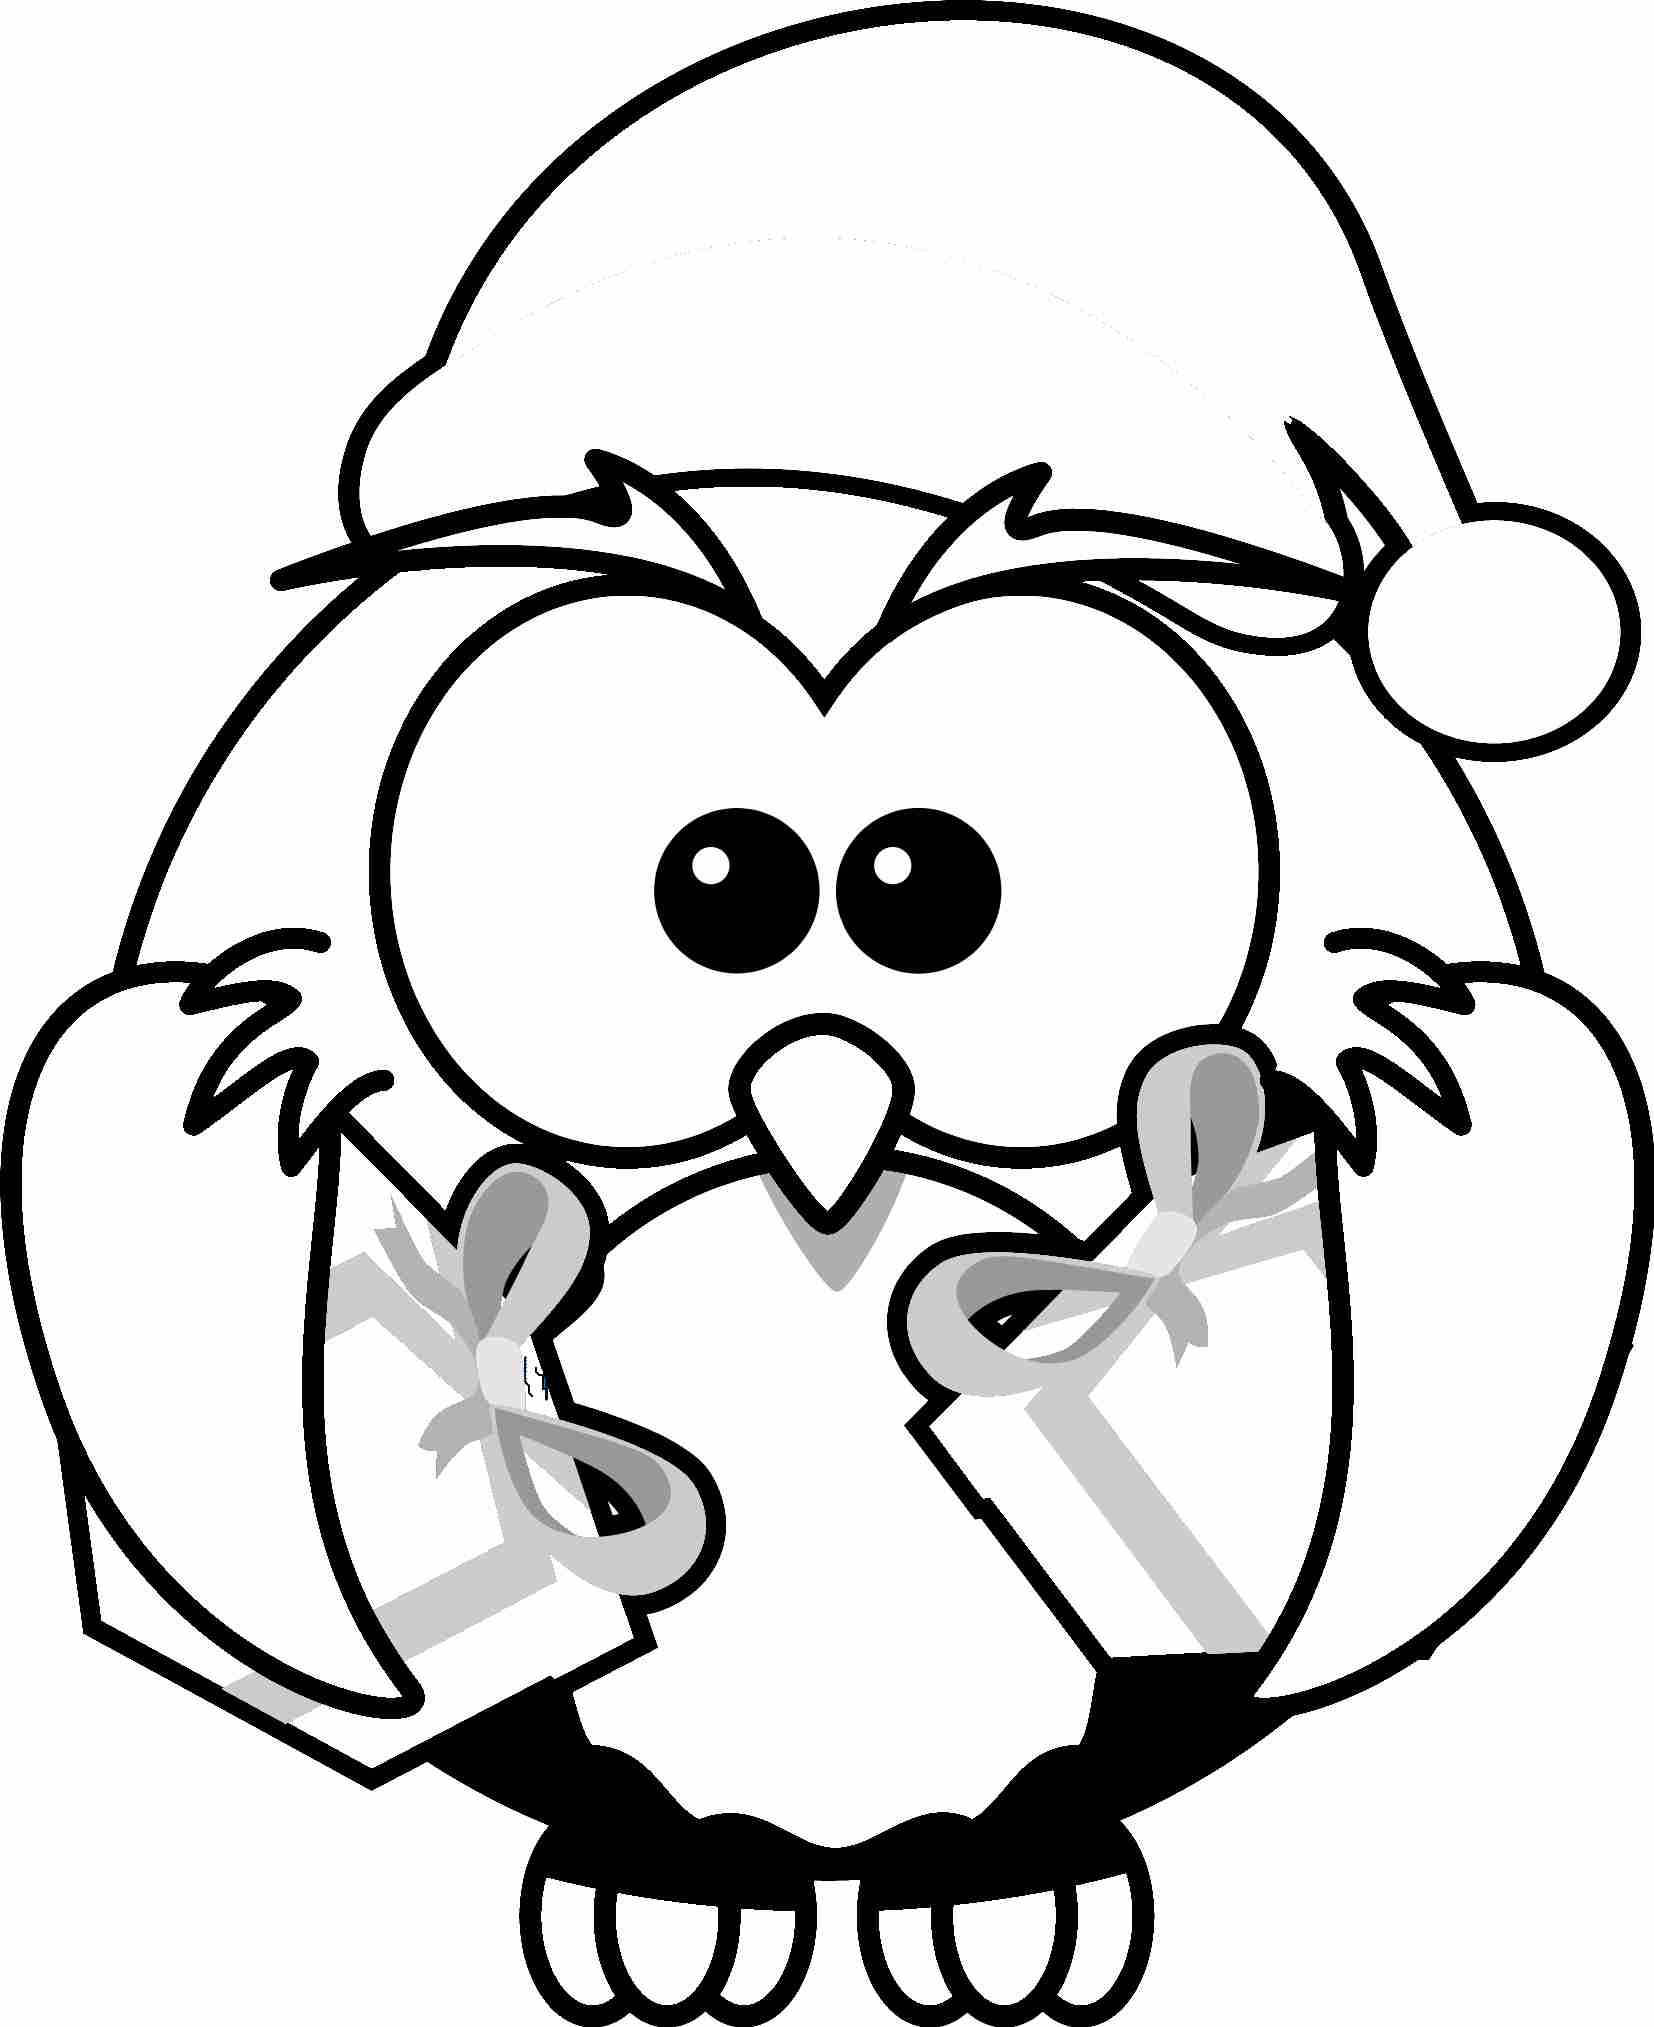 Christmas Coloring Pages For Children
 Christmas Coloring Pages